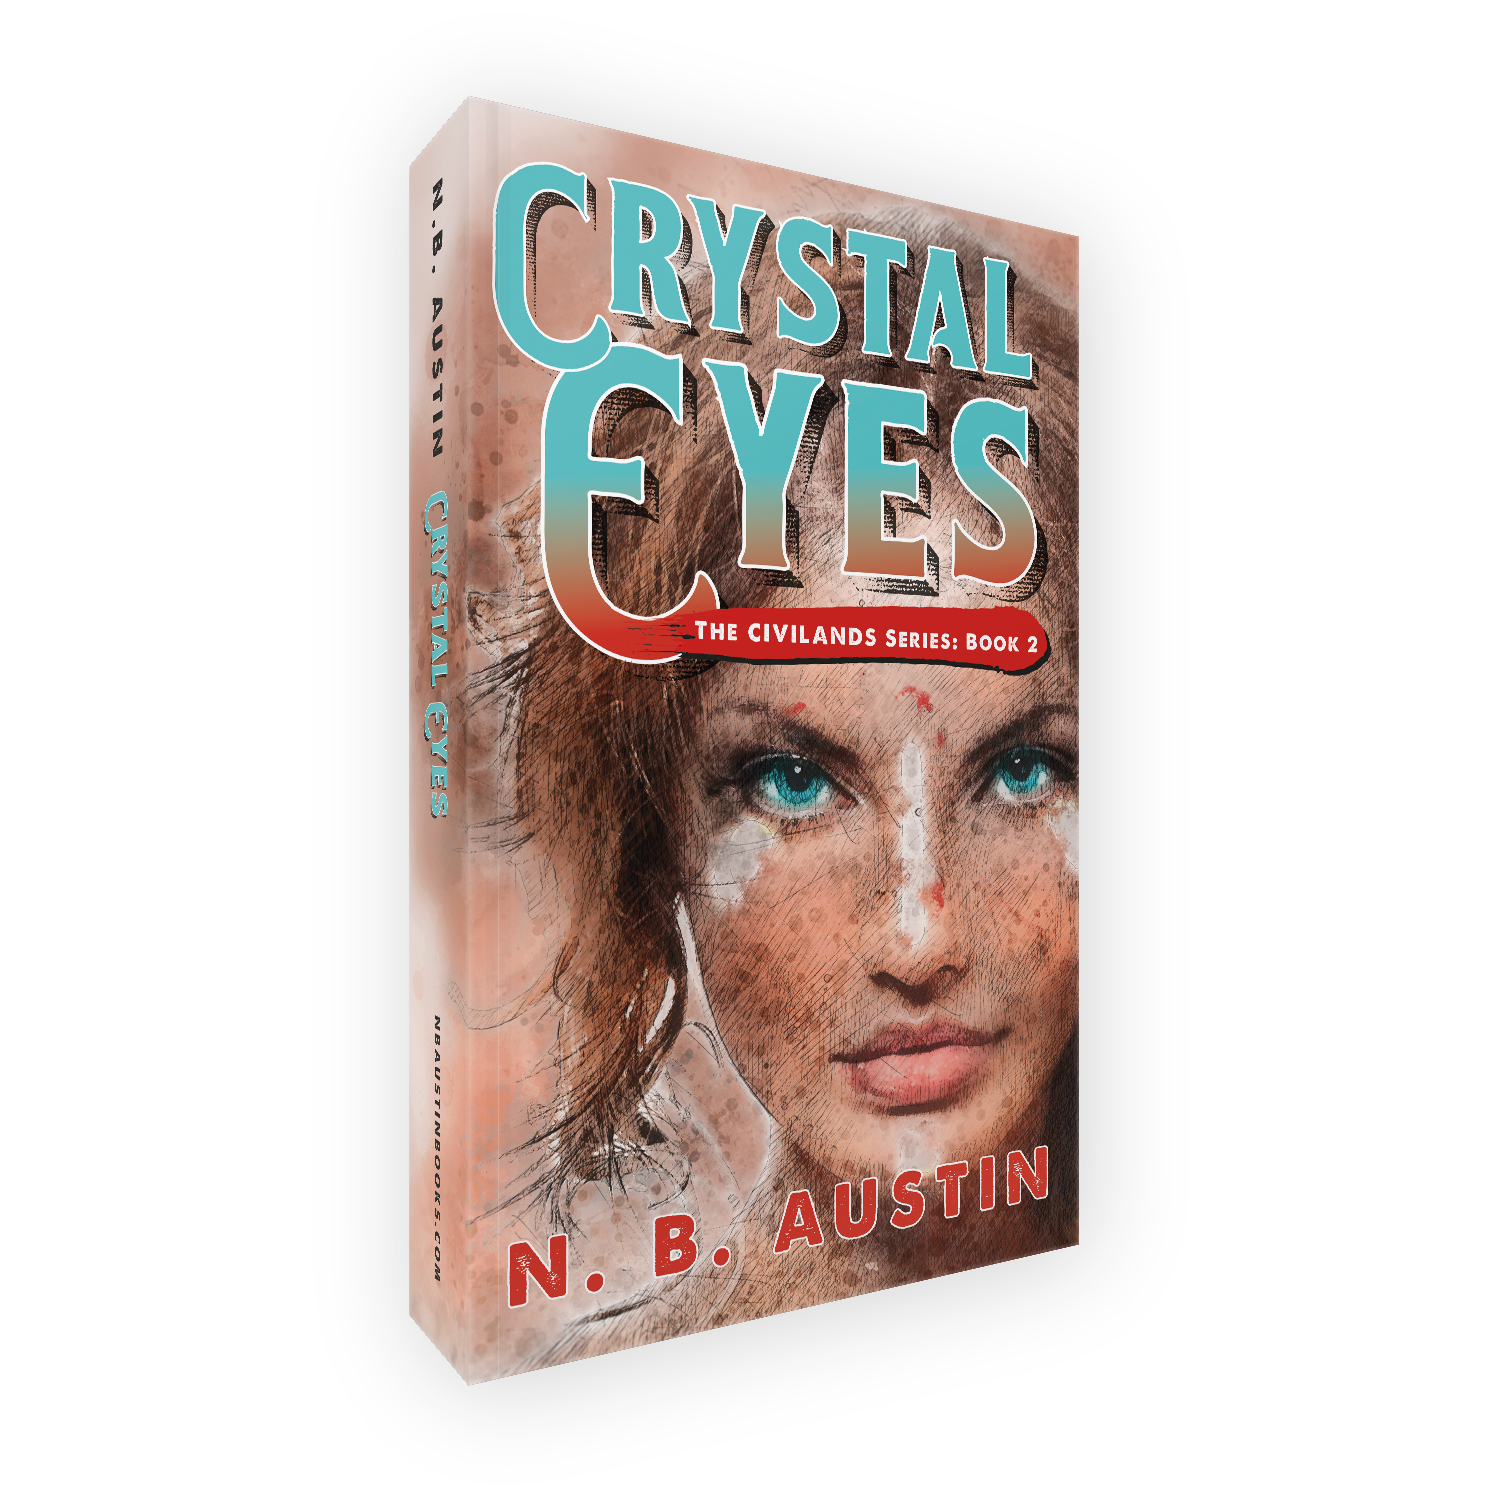 'Crystal Eyes' is book two in an alt-history mystical Western adventure series, by author NB Austin. The book cover & interior were designed by Mark Thomas, of coverness.com. To find out more about my book design services, please visit www.coverness.com.